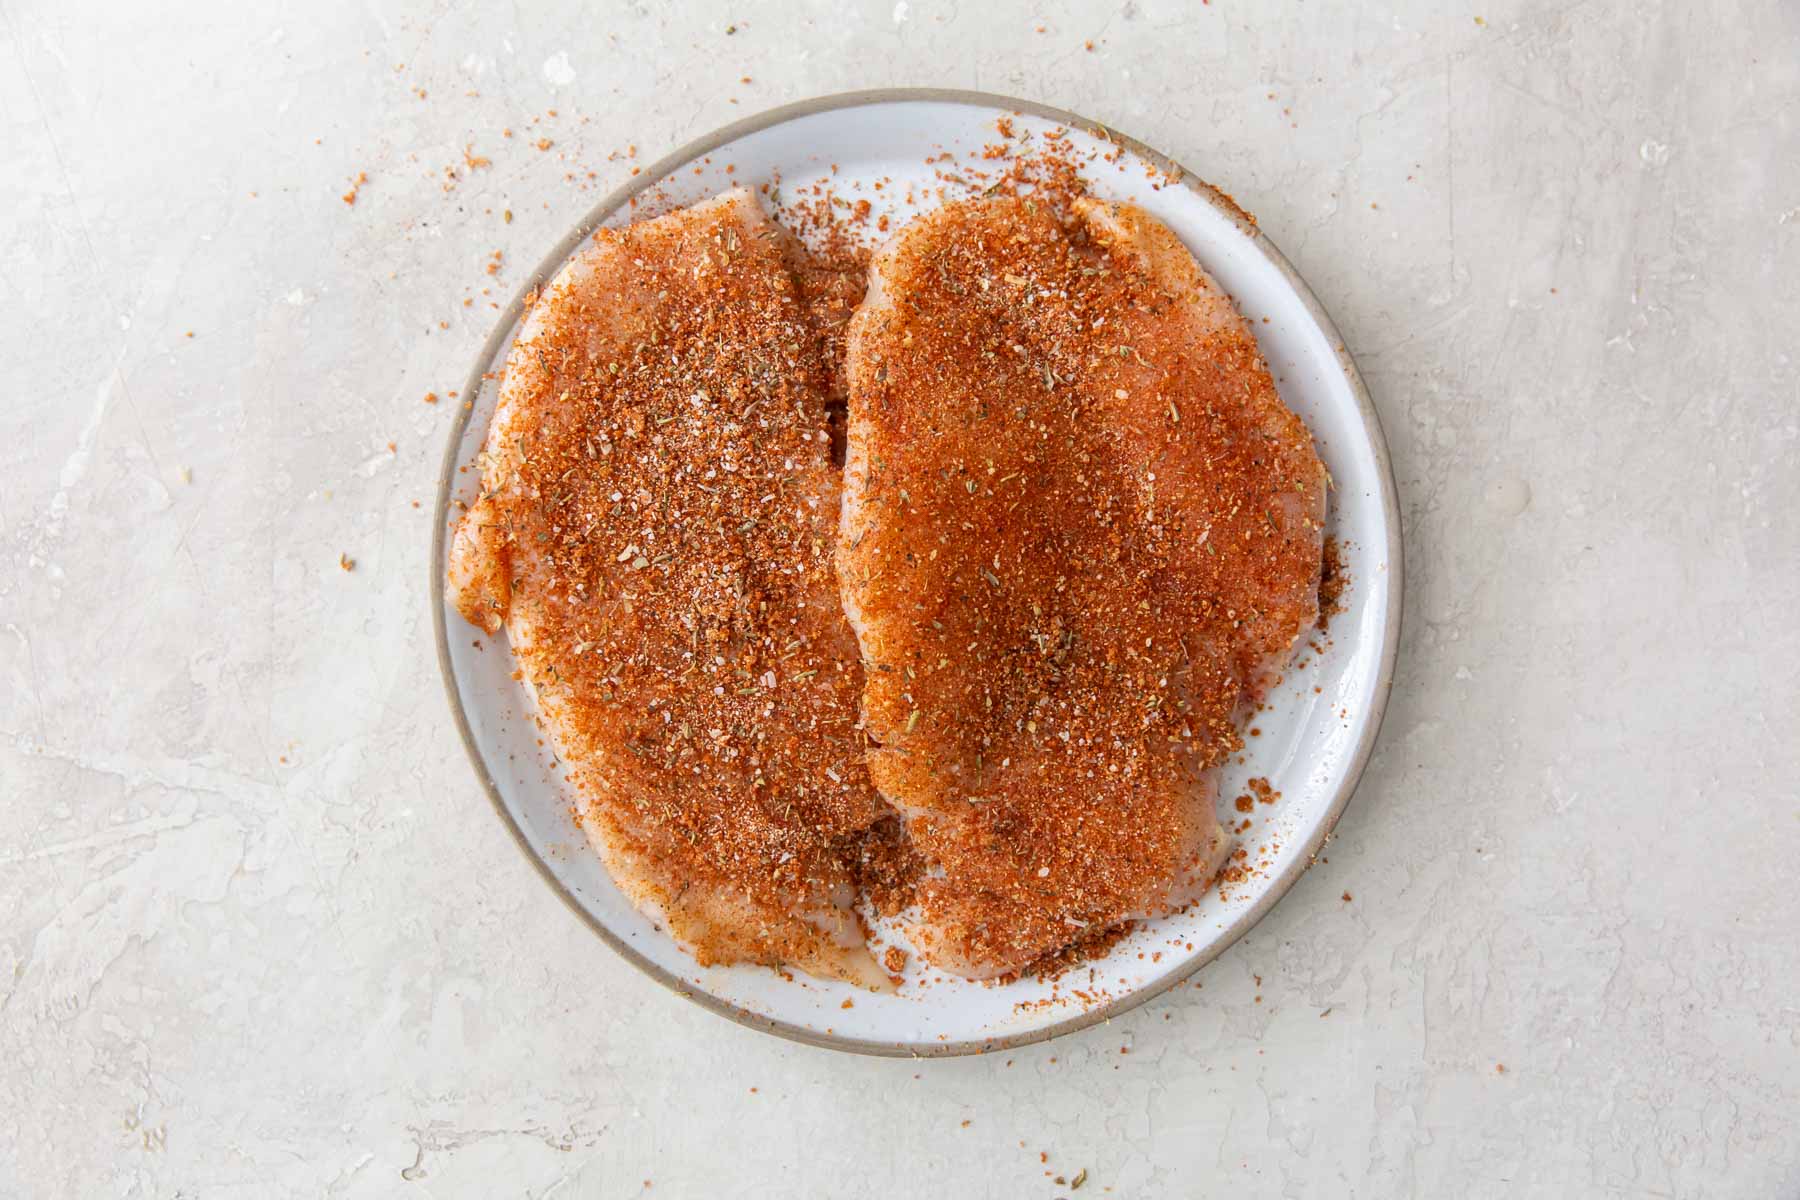 two boneless skinless chicken breasts rubbed with seasoning rub